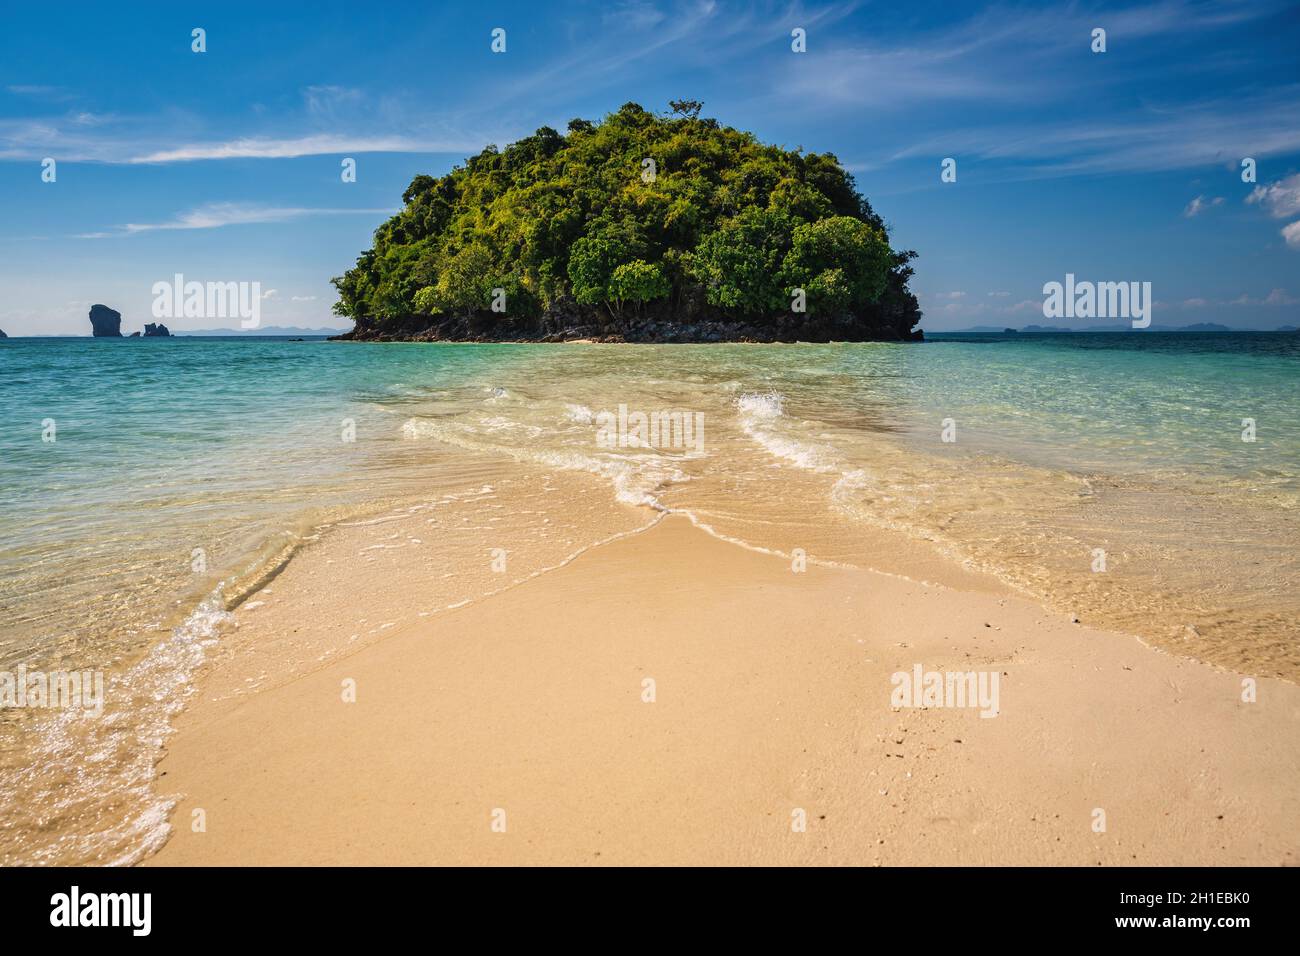 Tropical islands view with ocean blue sea water and white sand beach at Thale Waek (Separated Sea), Krabi Thailand nature landscape Stock Photo